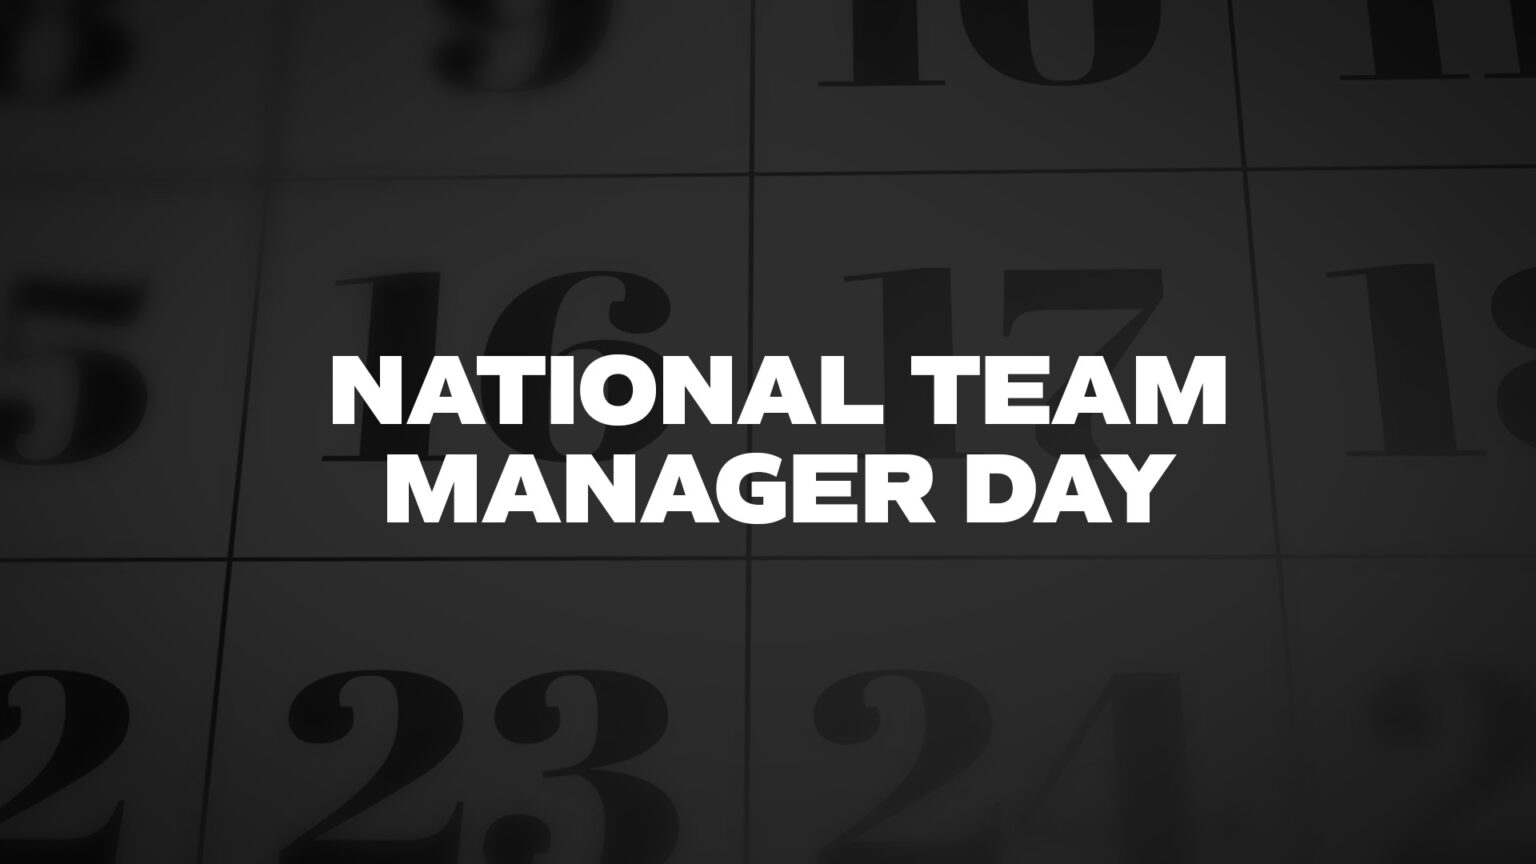 NATIONALTEAMMANAGERDAY List Of National Days